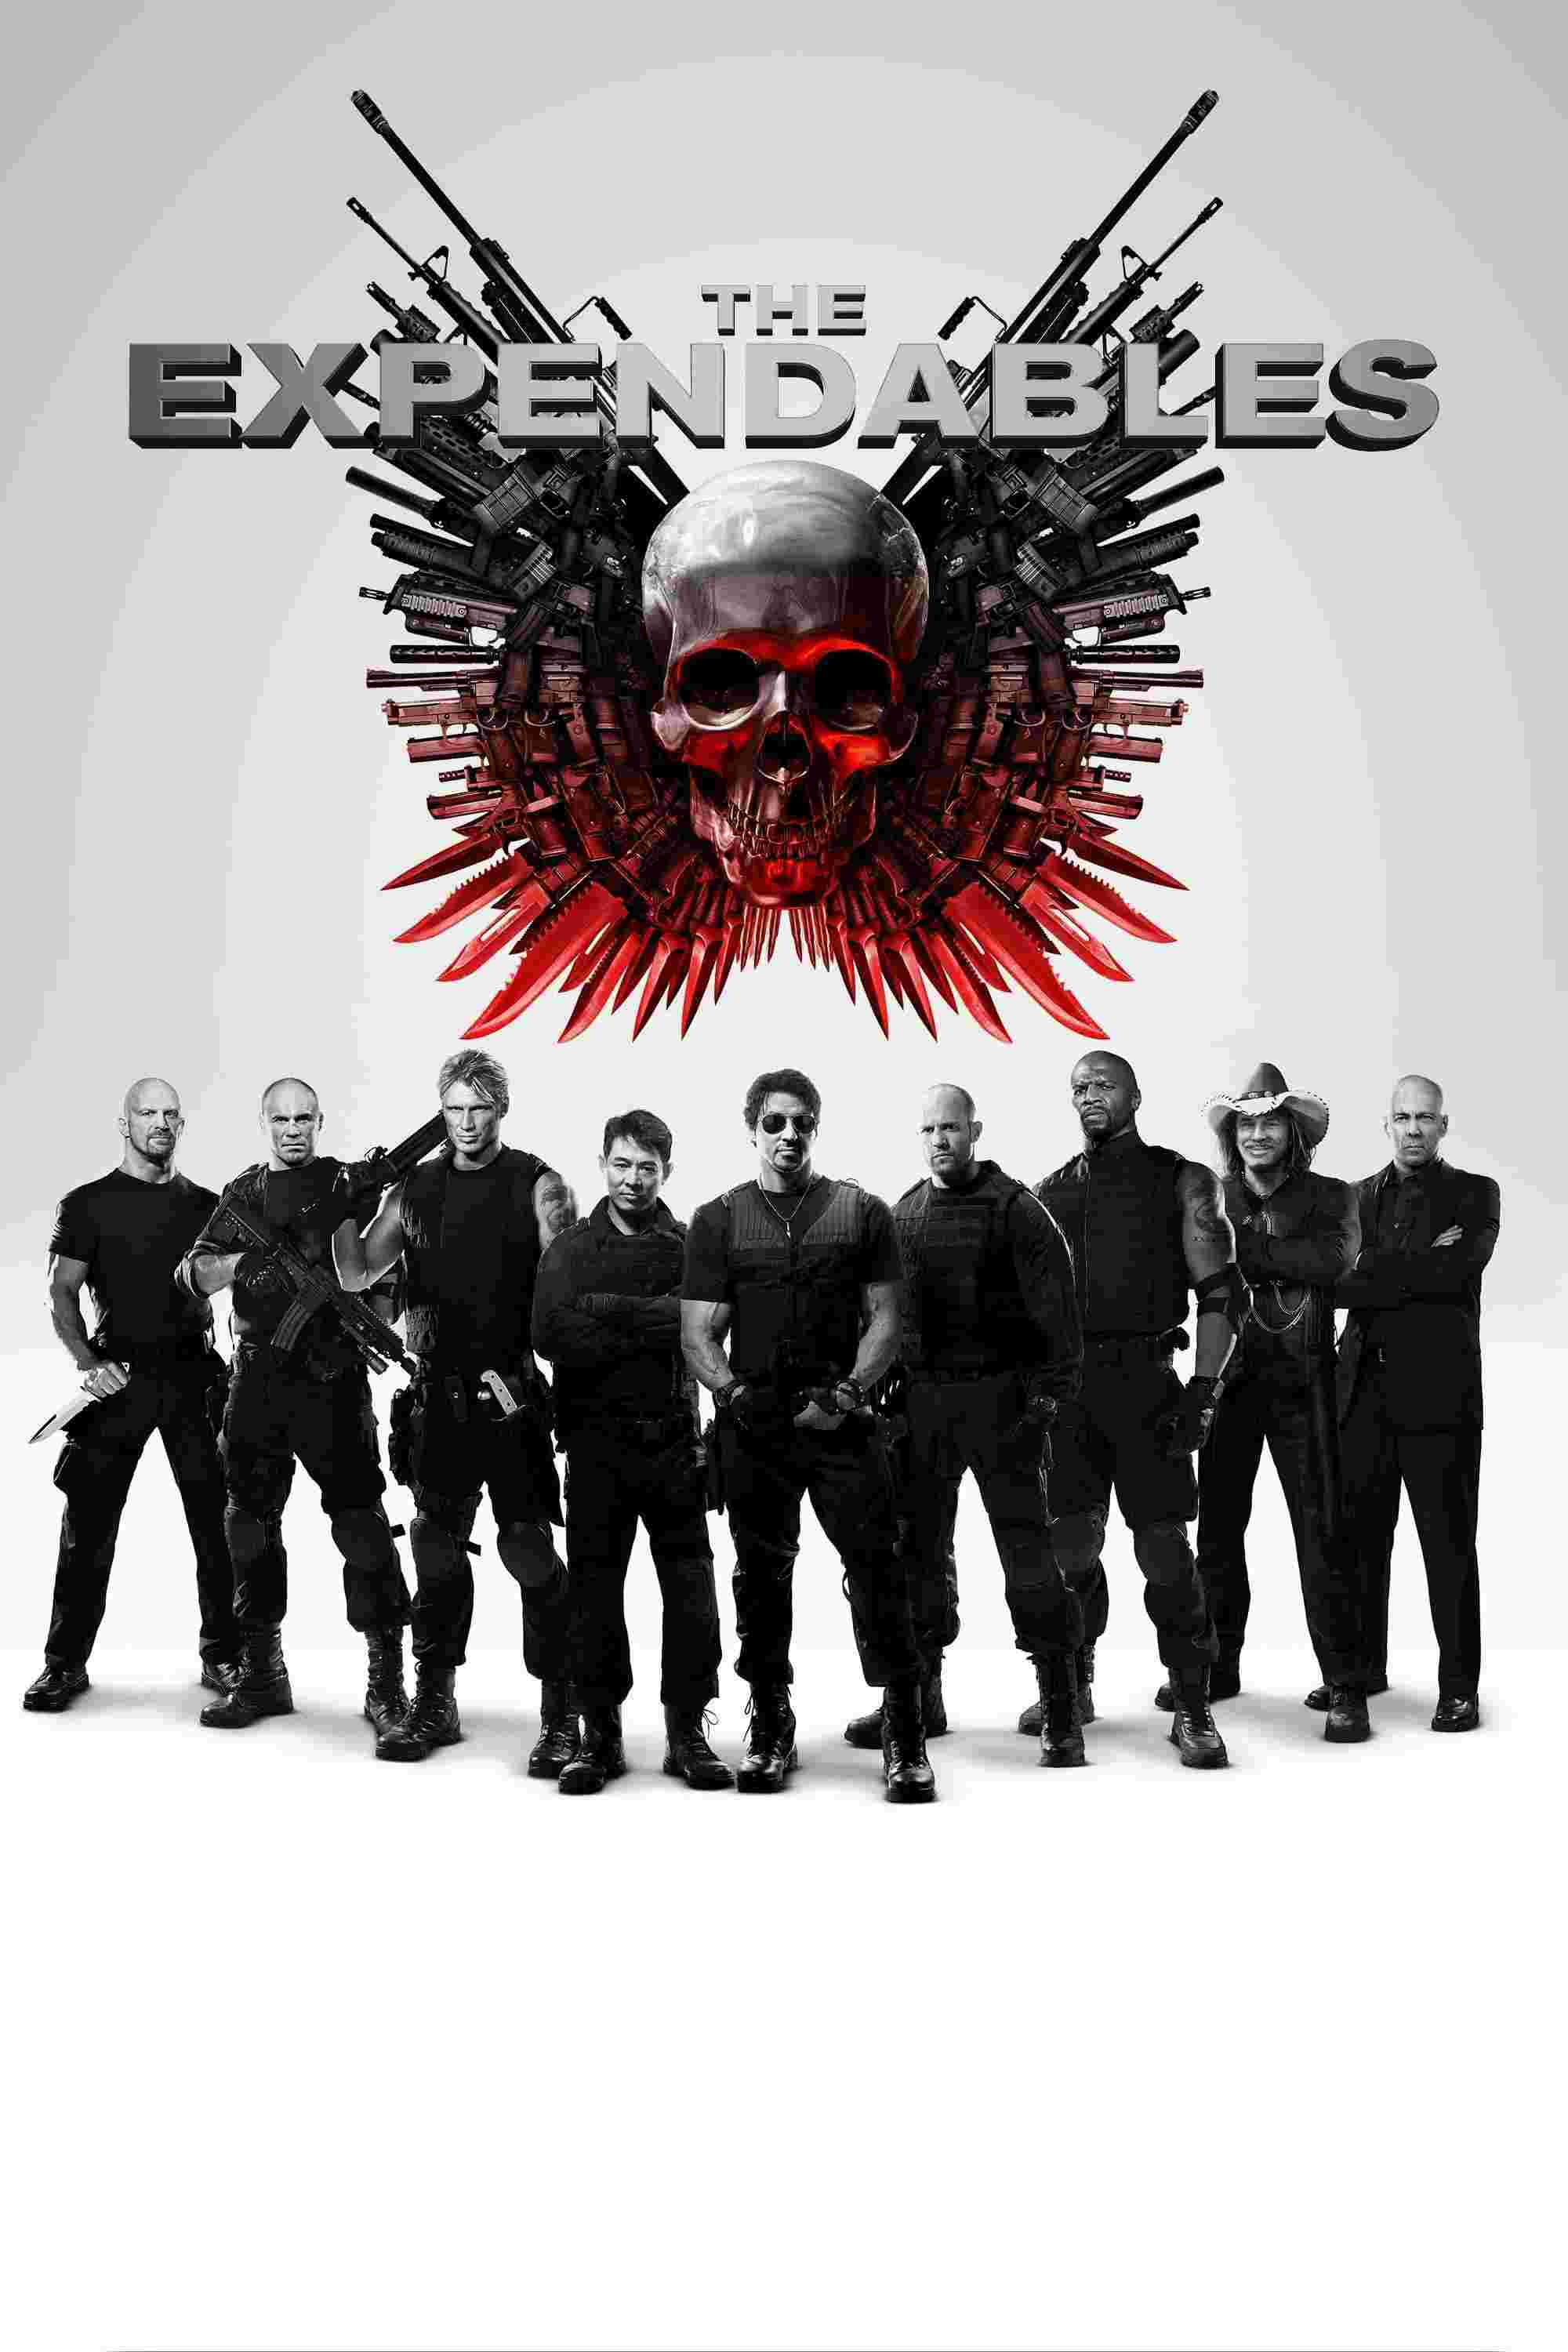 The Expendables (2010) Sylvester Stallone